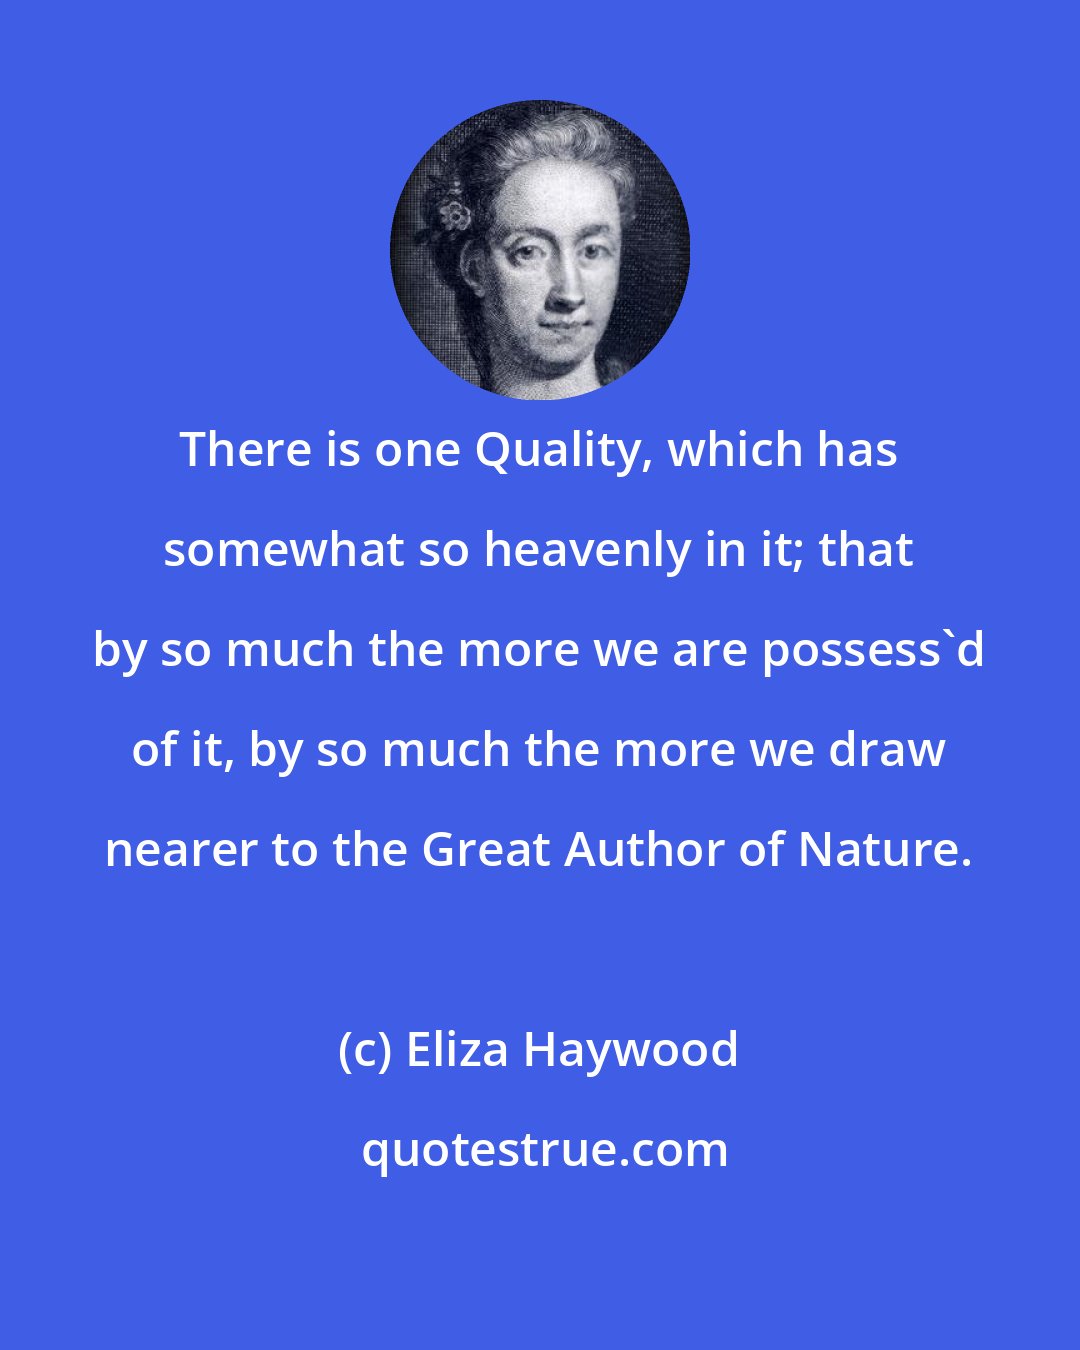 Eliza Haywood: There is one Quality, which has somewhat so heavenly in it; that by so much the more we are possess'd of it, by so much the more we draw nearer to the Great Author of Nature.